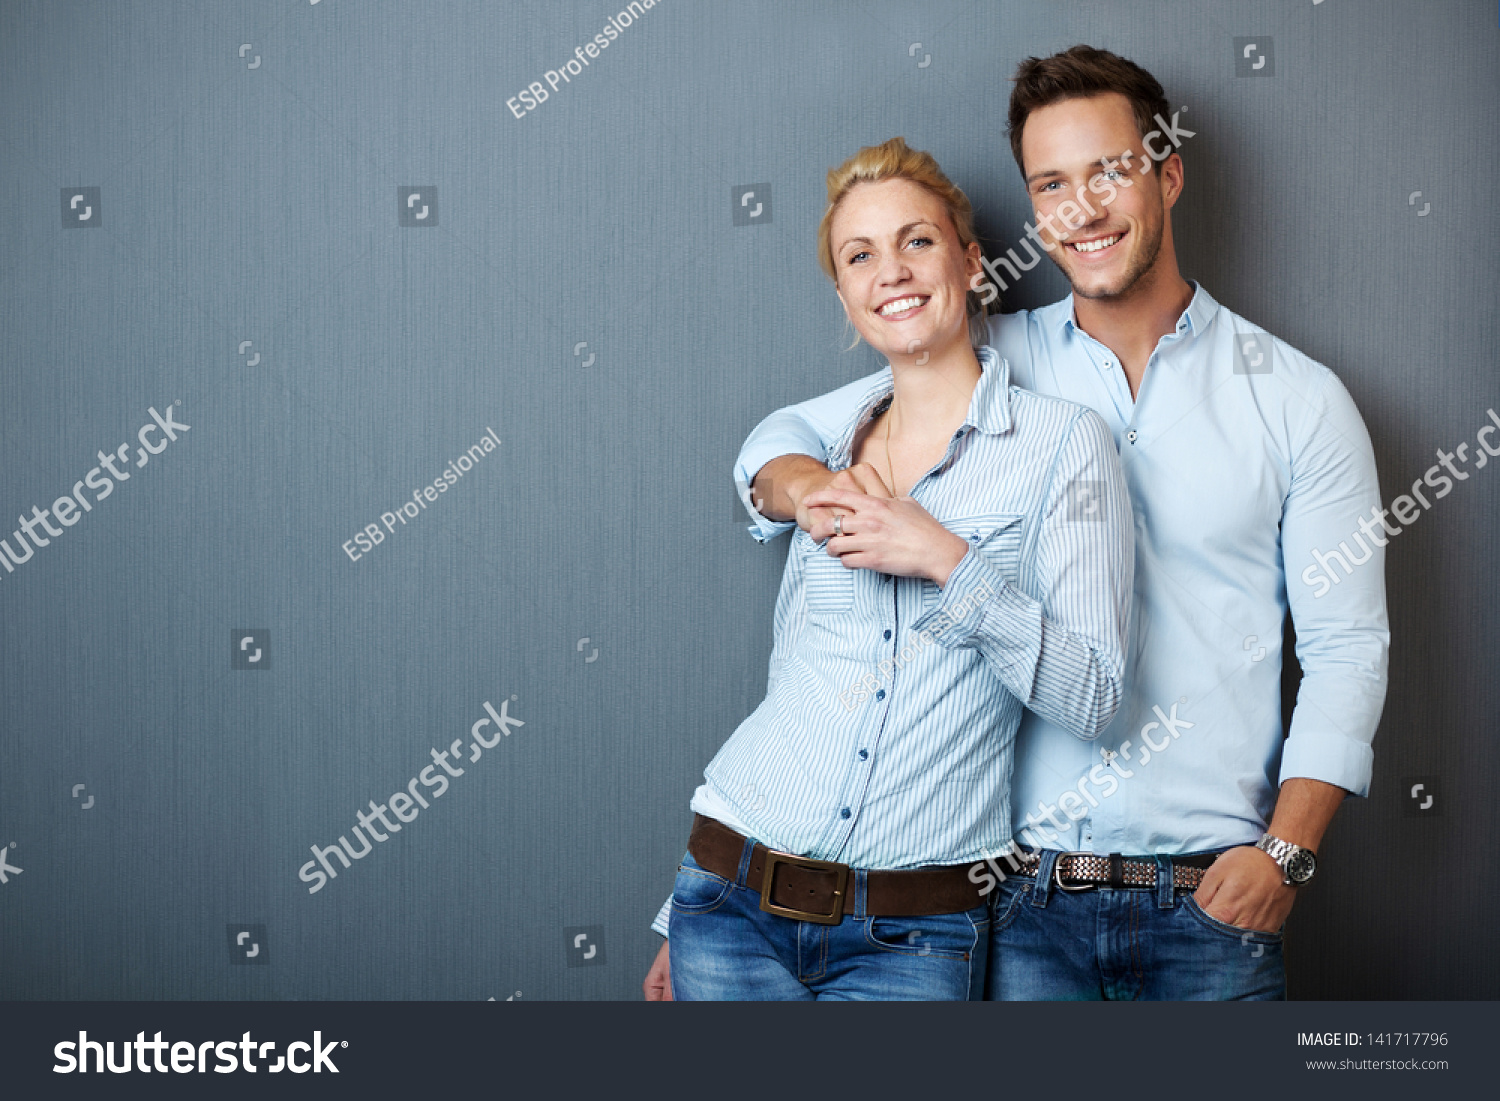 Portrait of a young couple standing against blue gray background #141717796